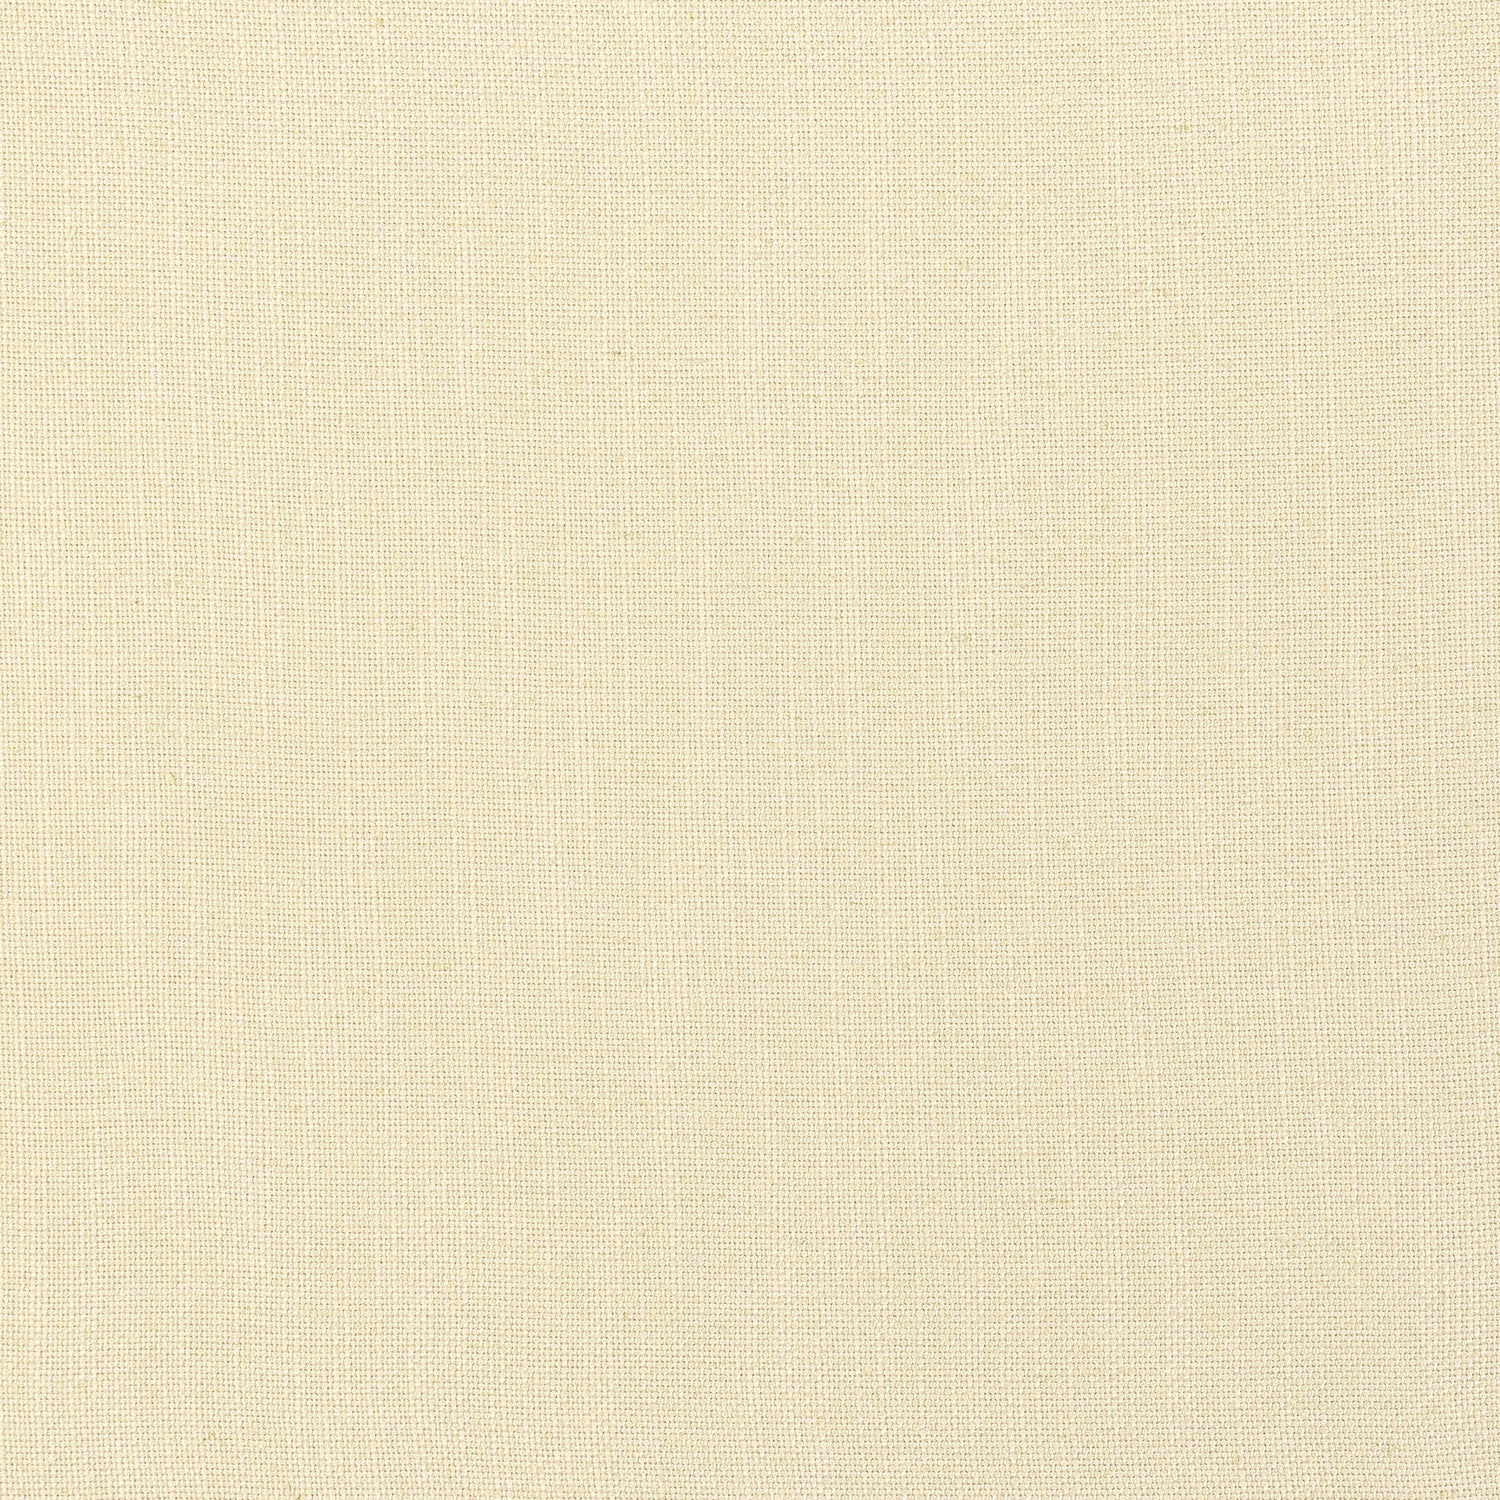 Palisade Linen fabric in cashmere color - pattern number FWW7629 - by Thibaut in the Palisades collection